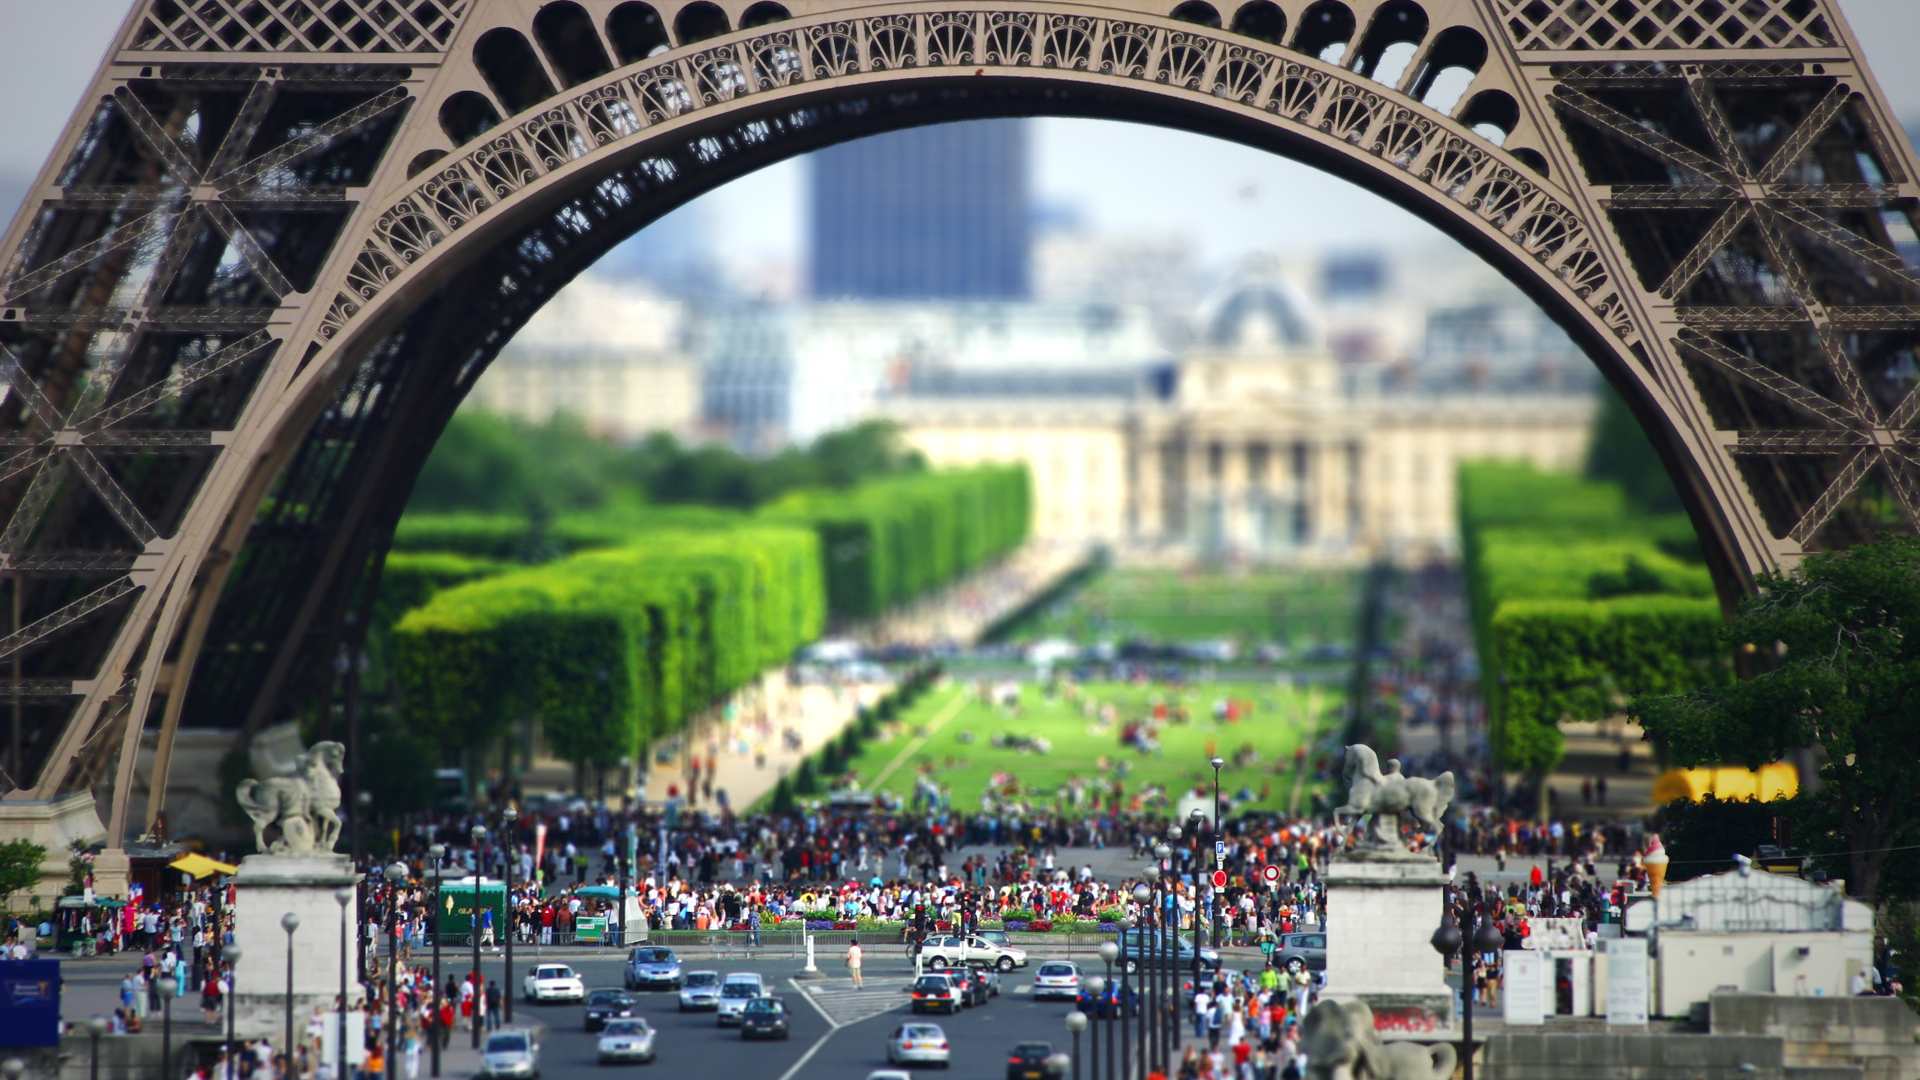 Immensity Of Torre Eiffel Tower With Cars On Road And Shallow Wallpaper Of Green Field And People 2K Travel